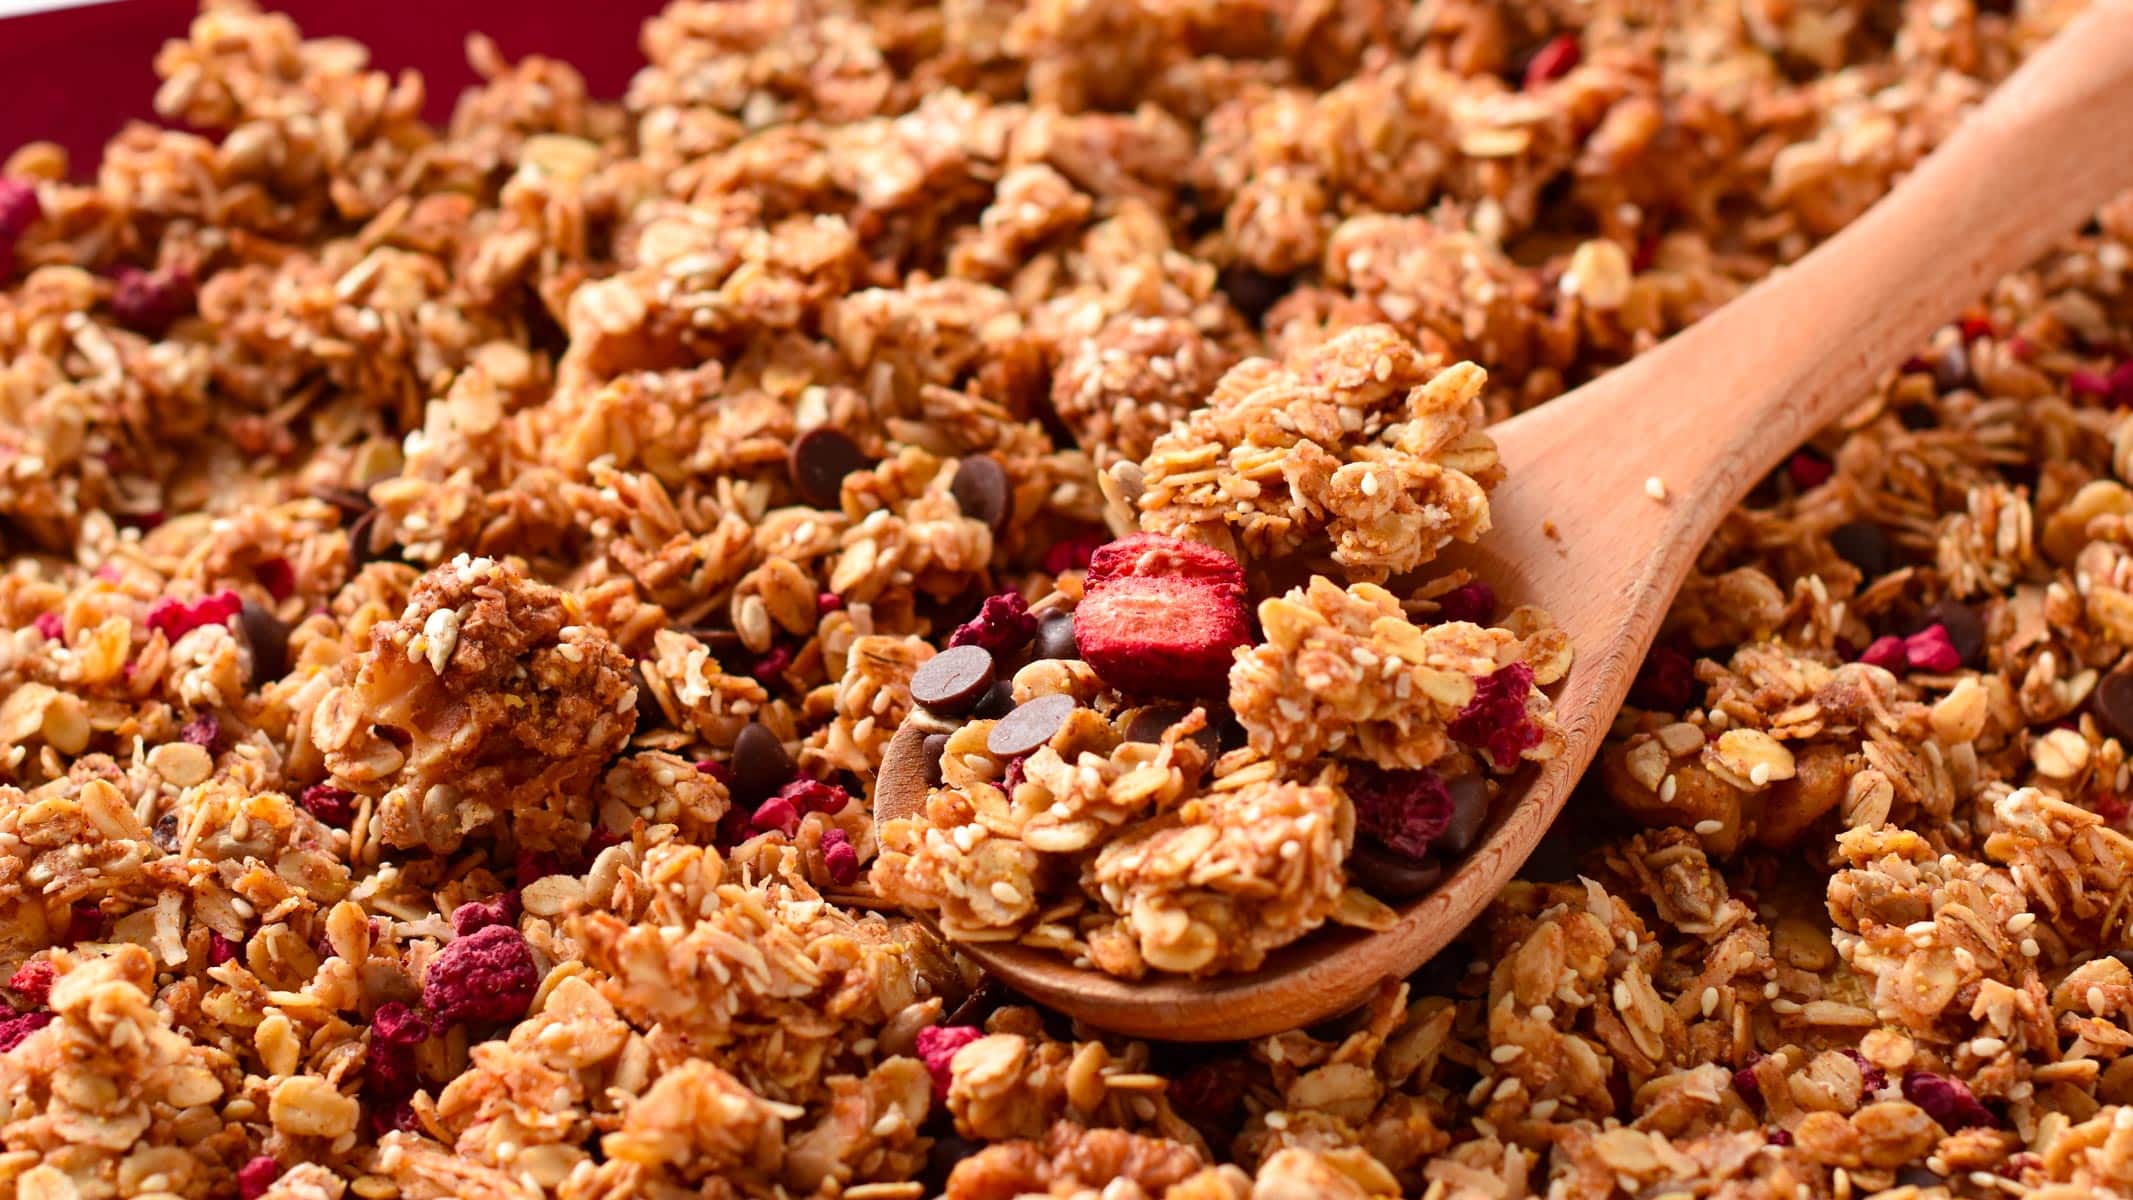 A baking sheet with a large batch of baked sugar-free granola and a wooden spoon with a serving.